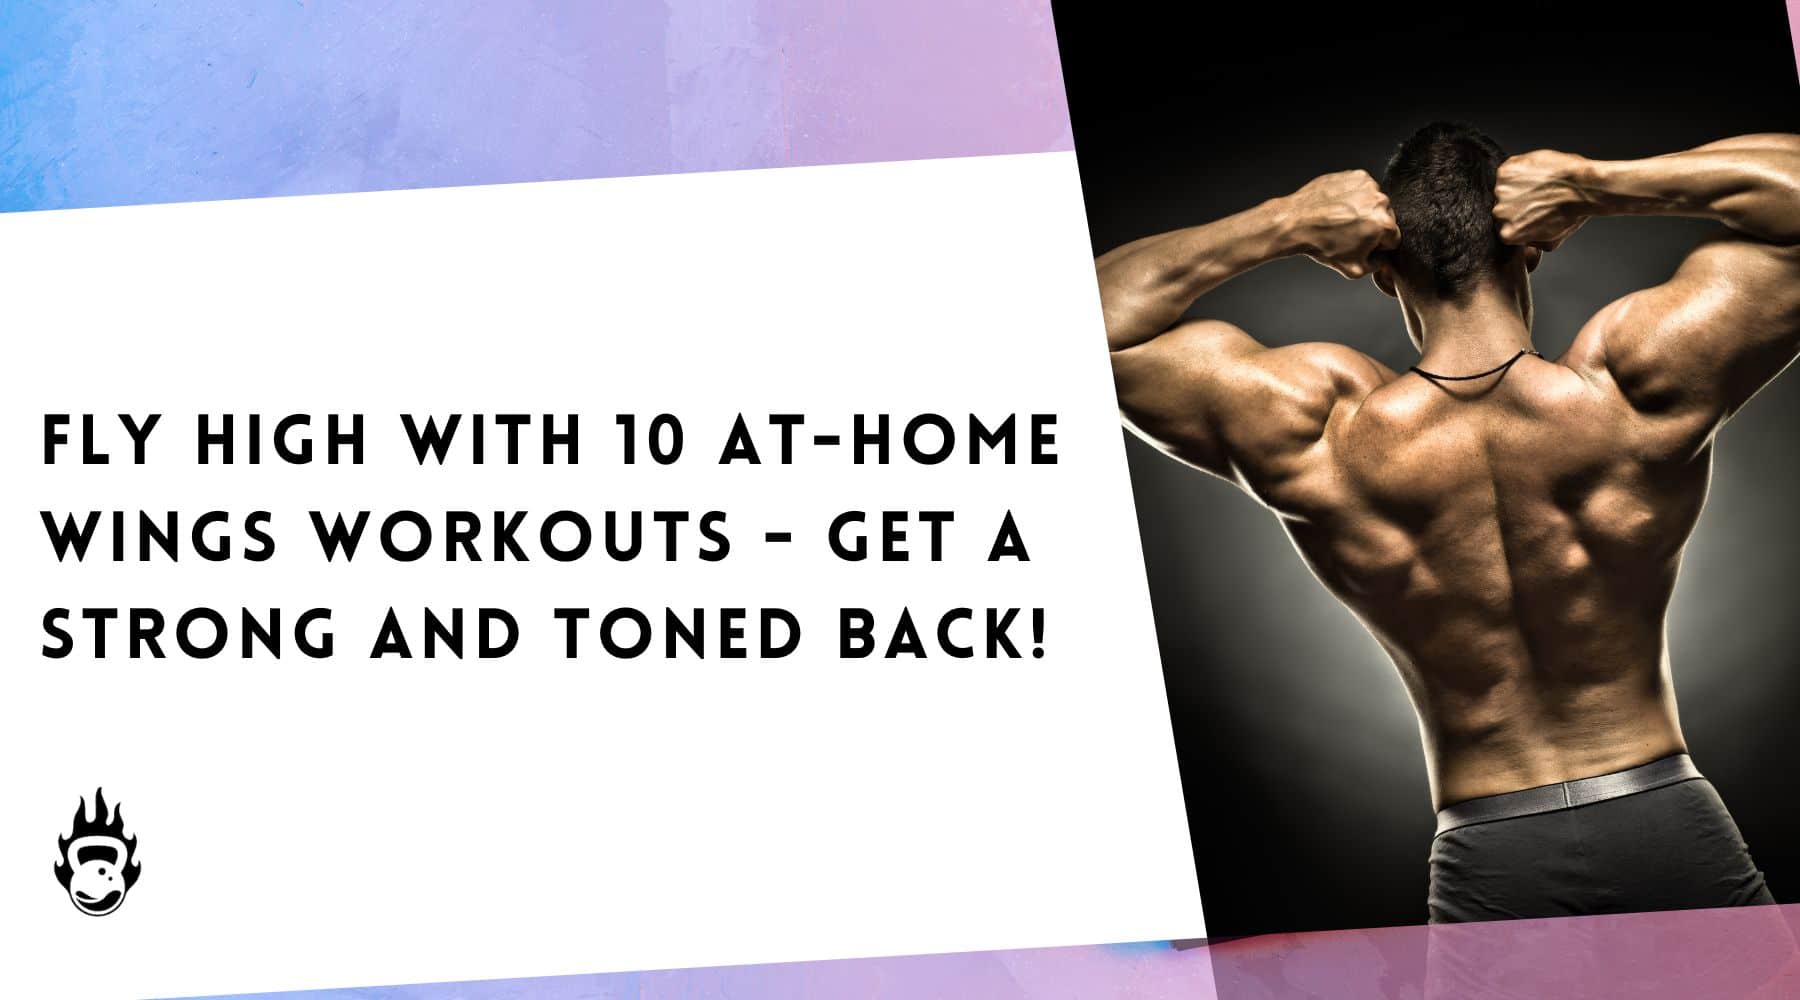 4-Week Upper Body Back and Arms Workout for V-Taper Muscles